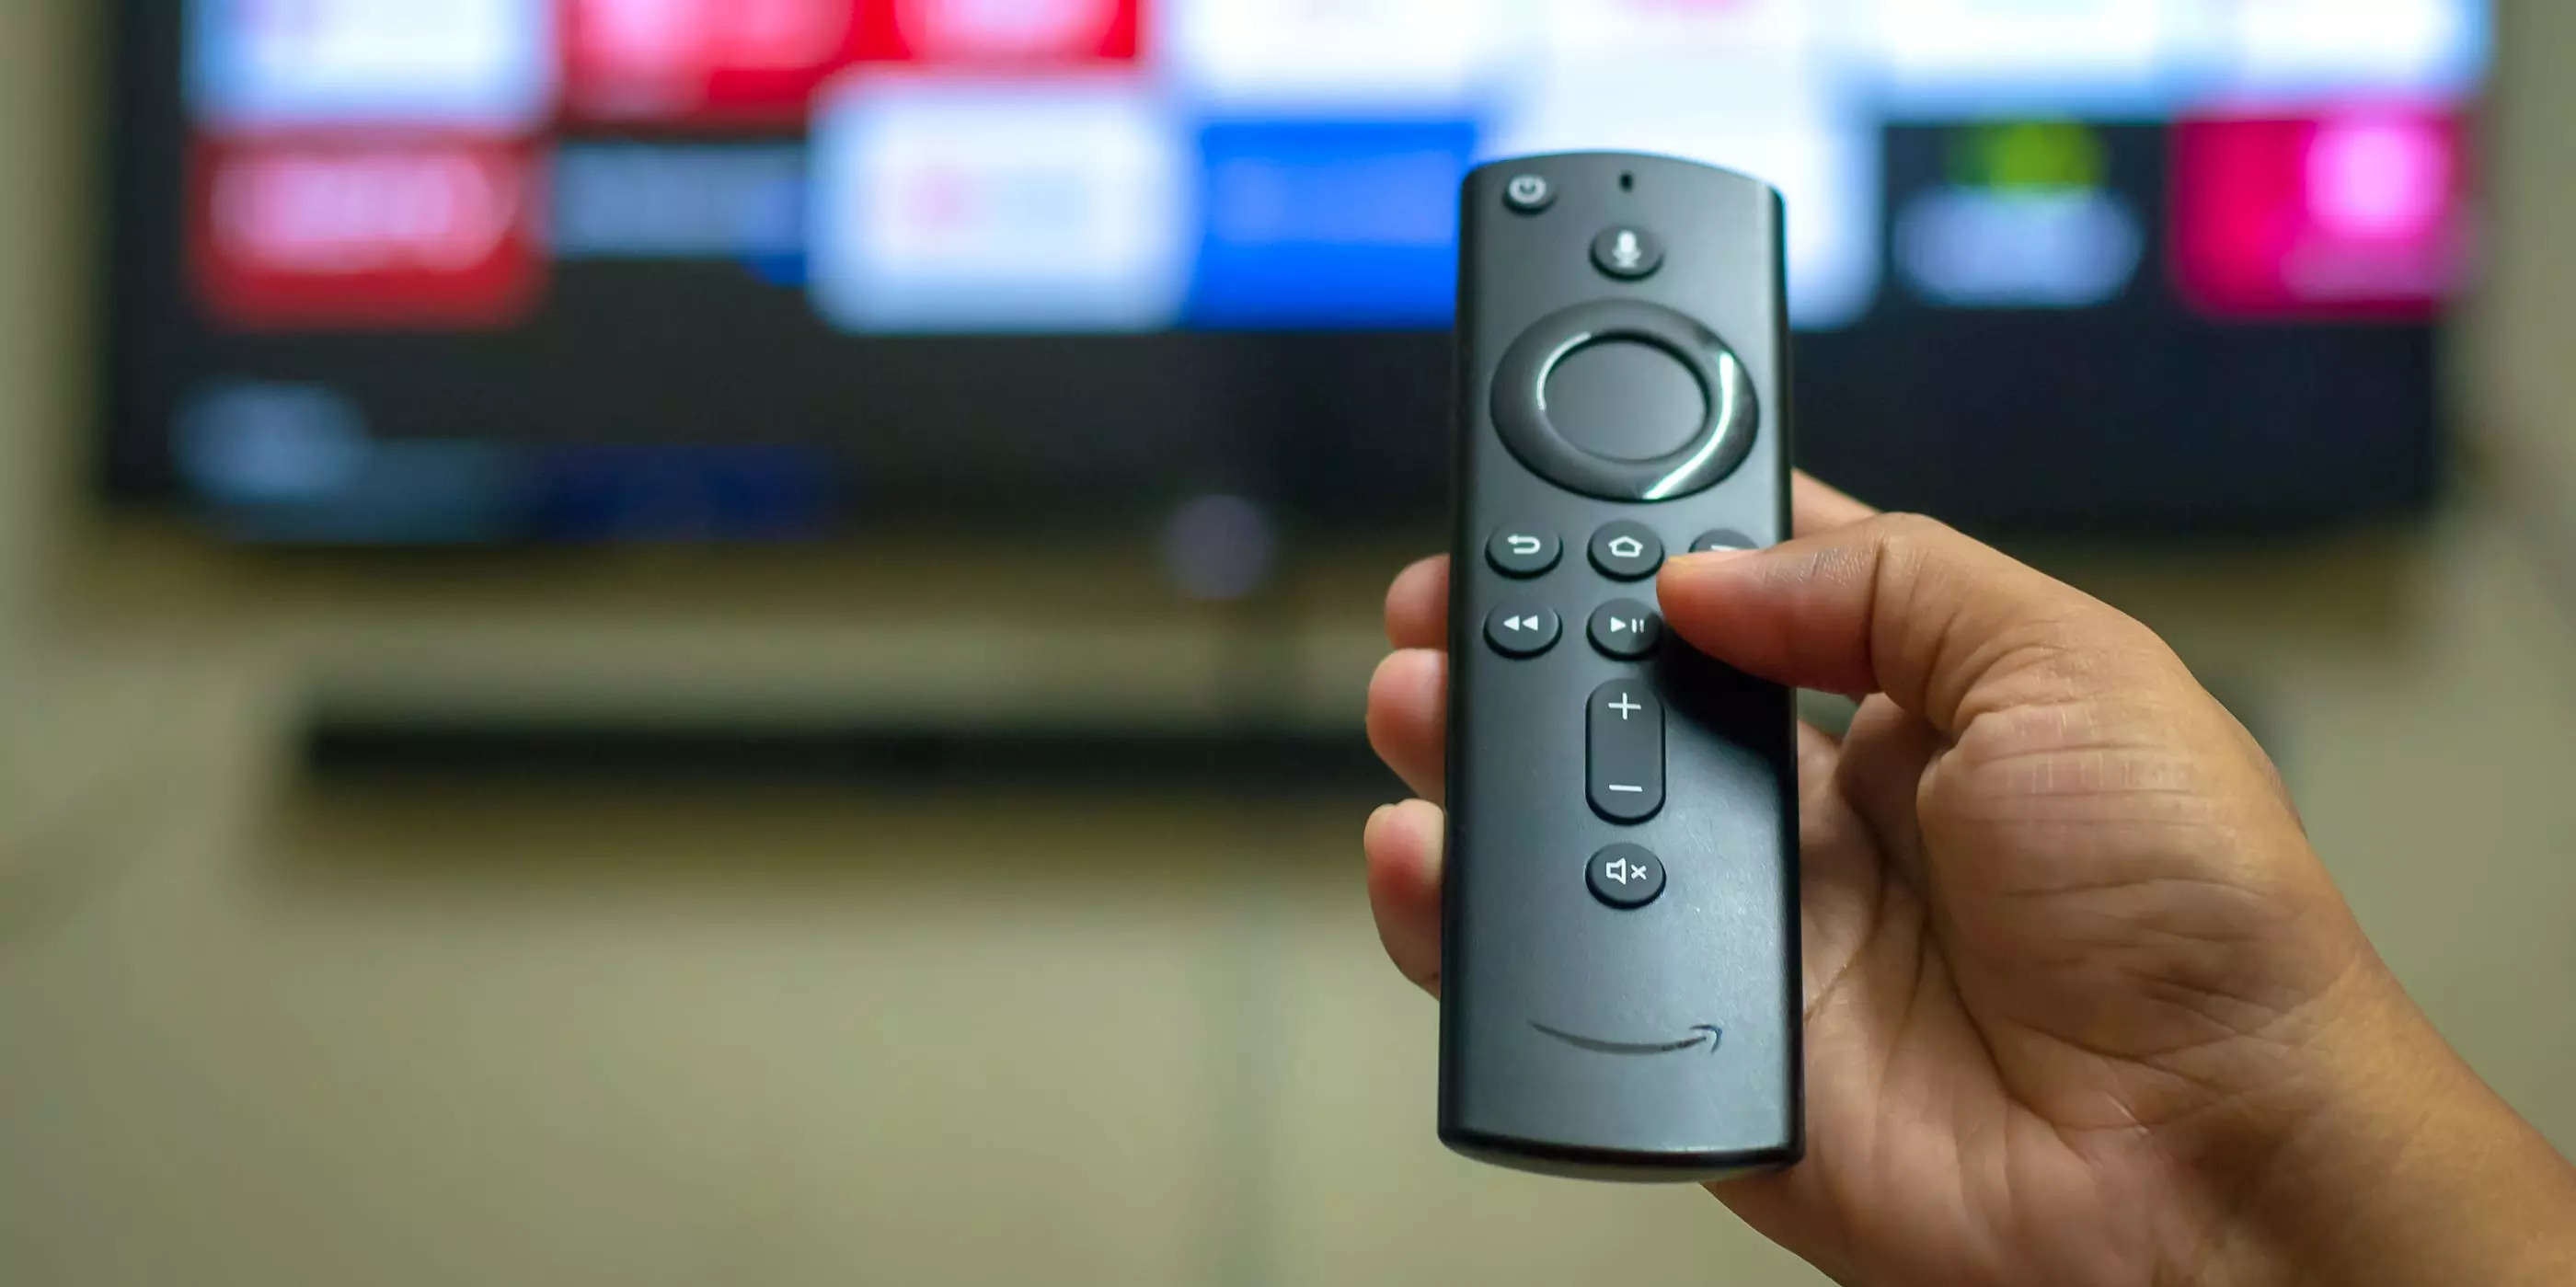 Fix Unable to Update Your Fire TV Stick